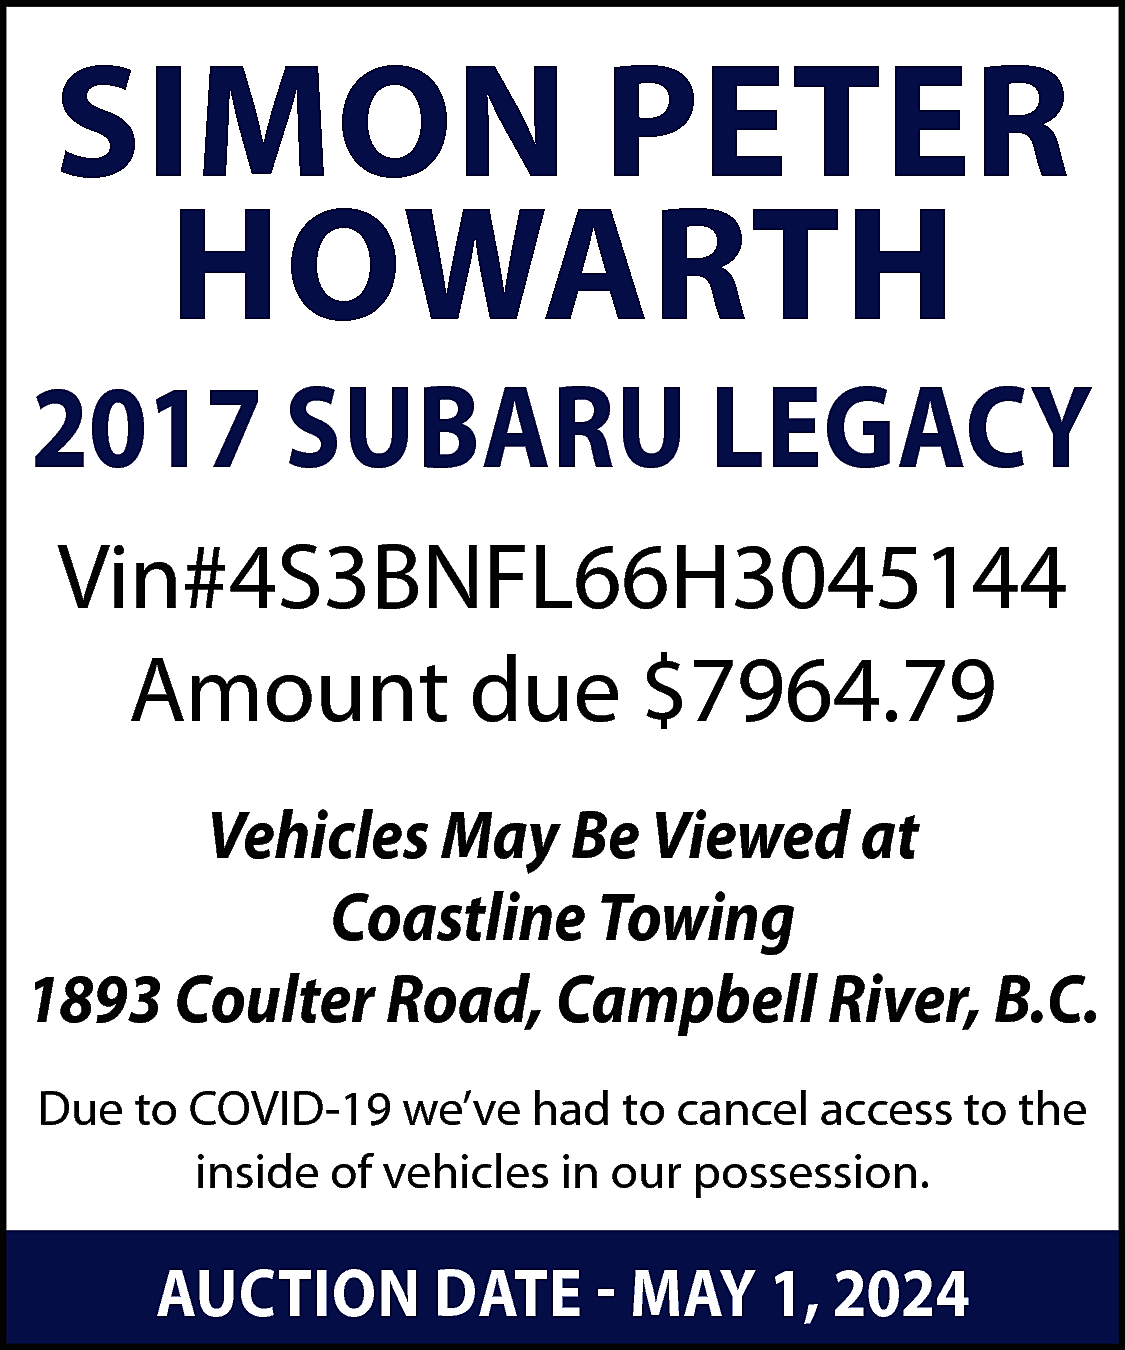 SIMON PETER <br>HOWARTH <br> <br>2017  SIMON PETER  HOWARTH    2017 SUBARU LEGACY  Vin#4S3BNFL66H3045144  Amount due $7964.79  Vehicles May Be Viewed at  Coastline Towing  1893 Coulter Road, Campbell River, B.C.  Due to COVID-19 we’ve had to cancel access to the  inside of vehicles in our possession.    AUCTION DATE - MAY 1, 2024    